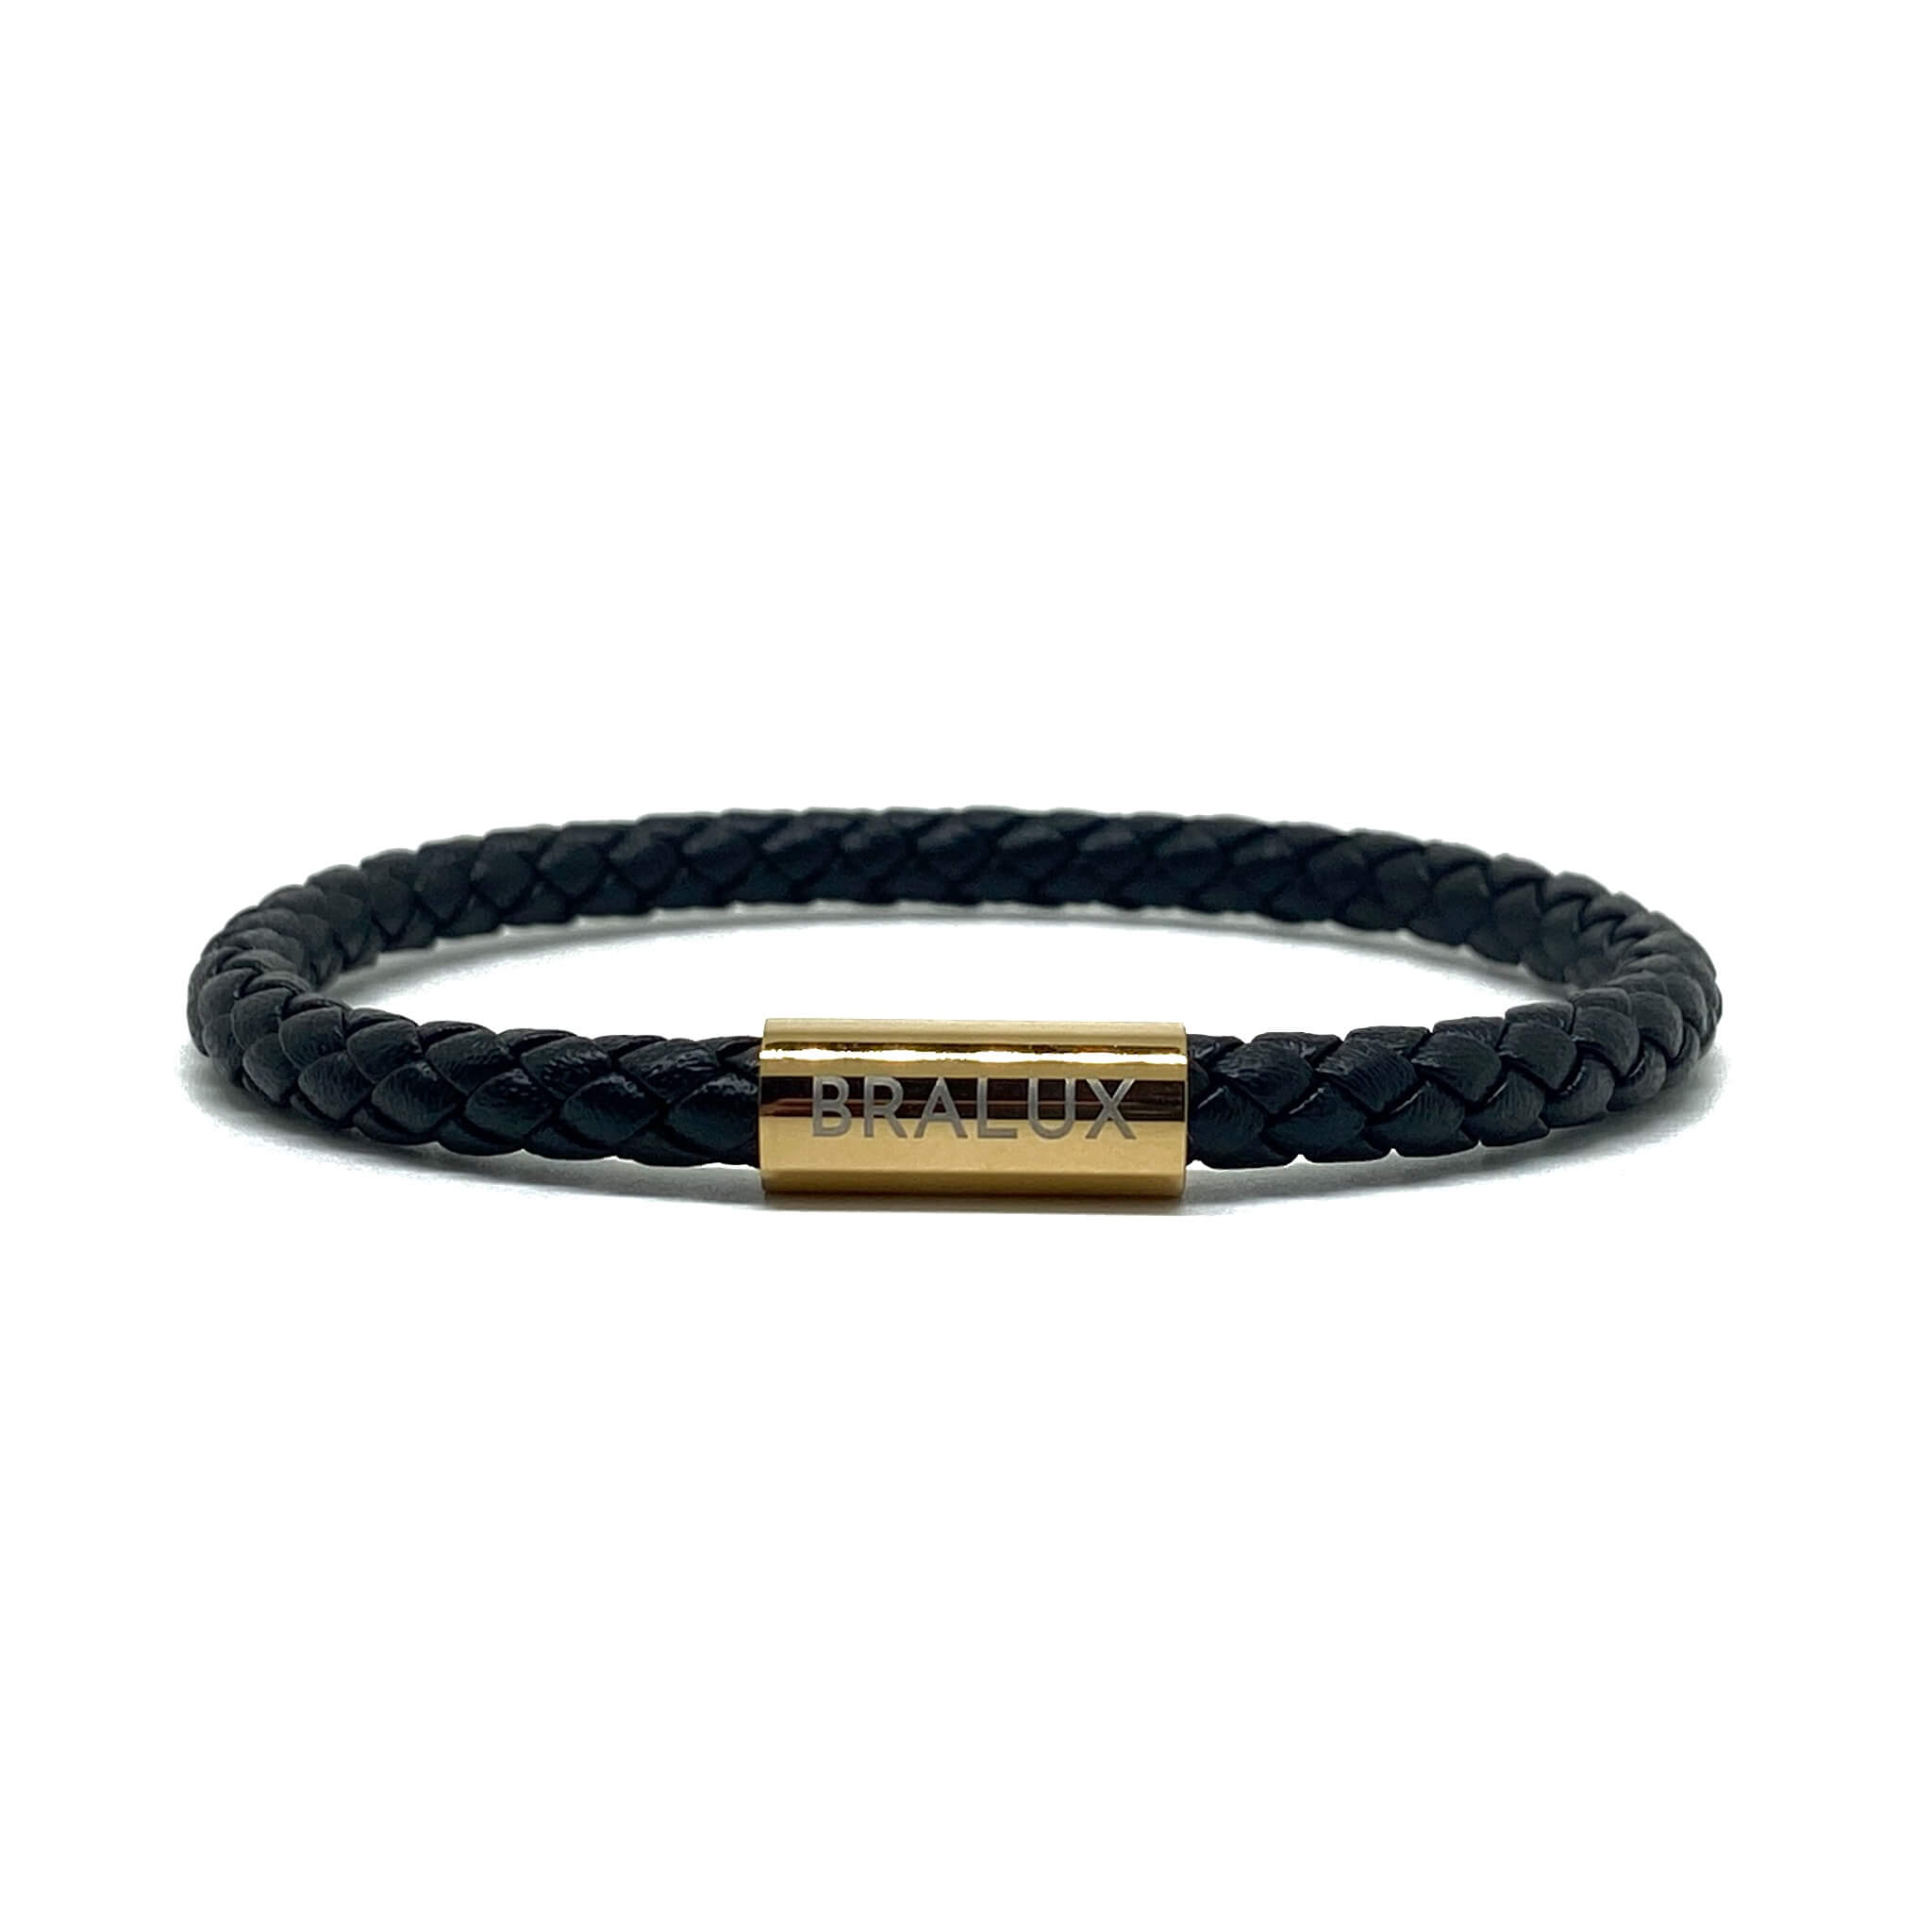 The Black and Gold plated leather bracelet